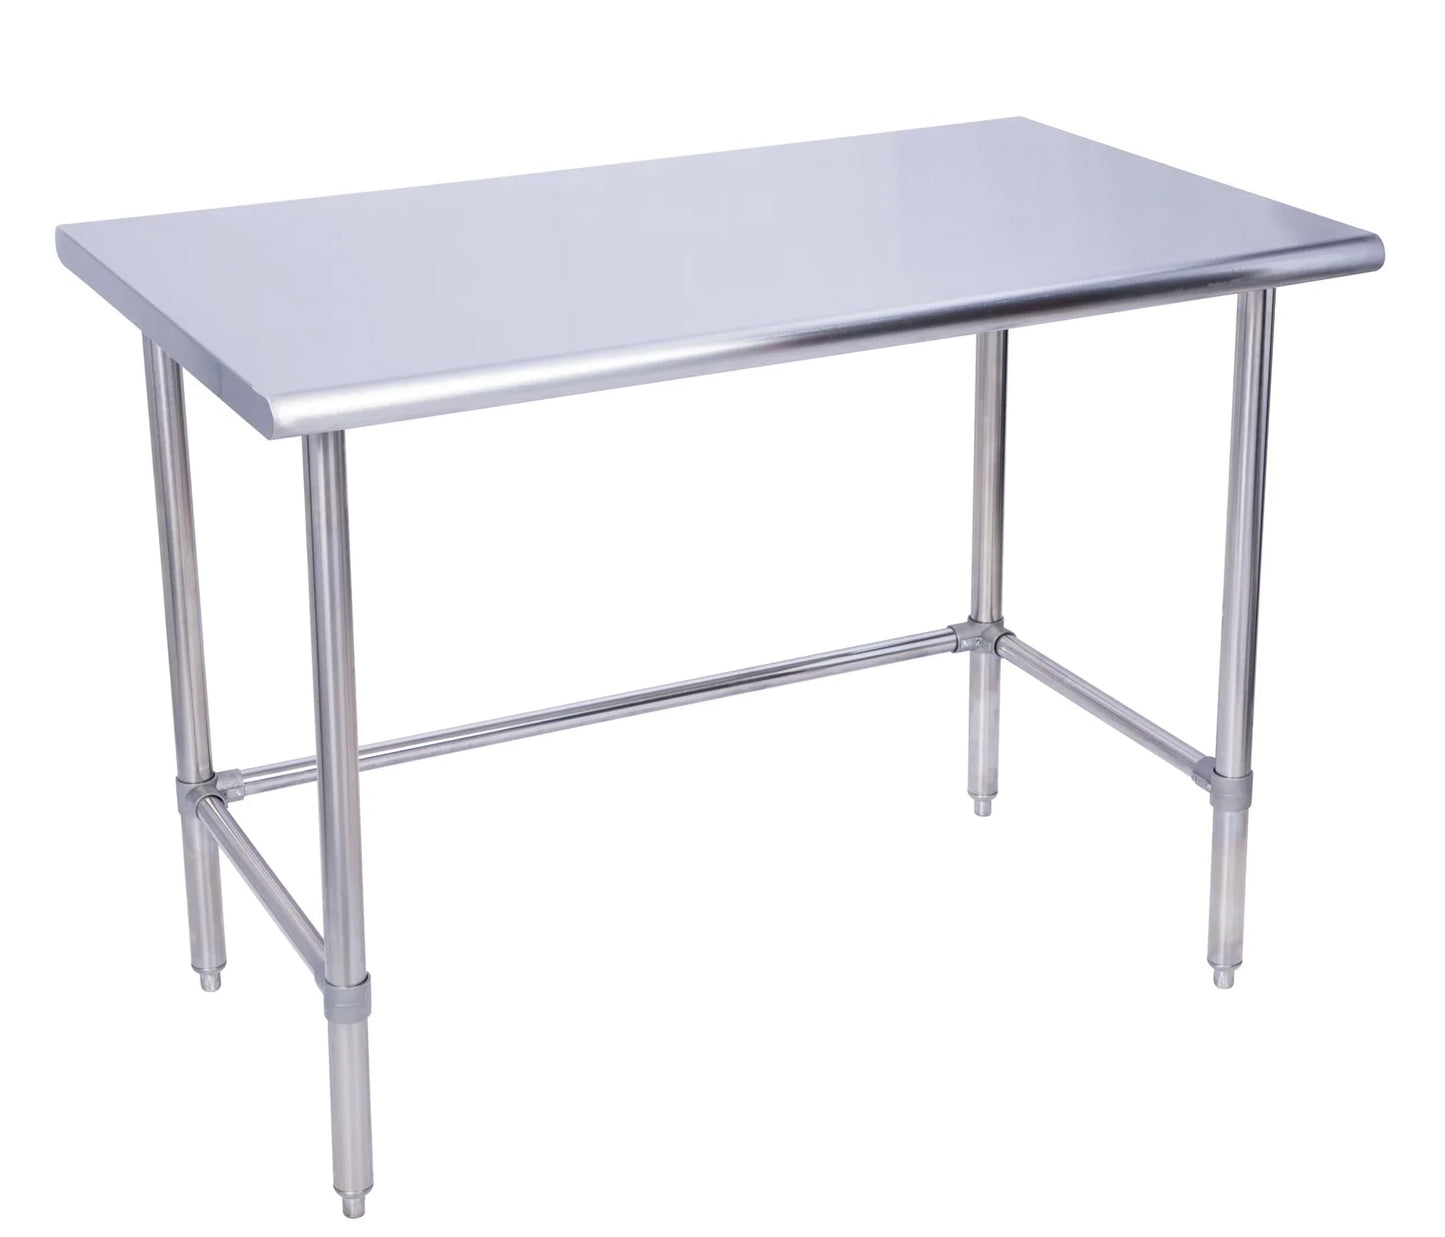 KCS WSCB-3030 30" x 30" Stainless Steel Work Table With Cross Bar